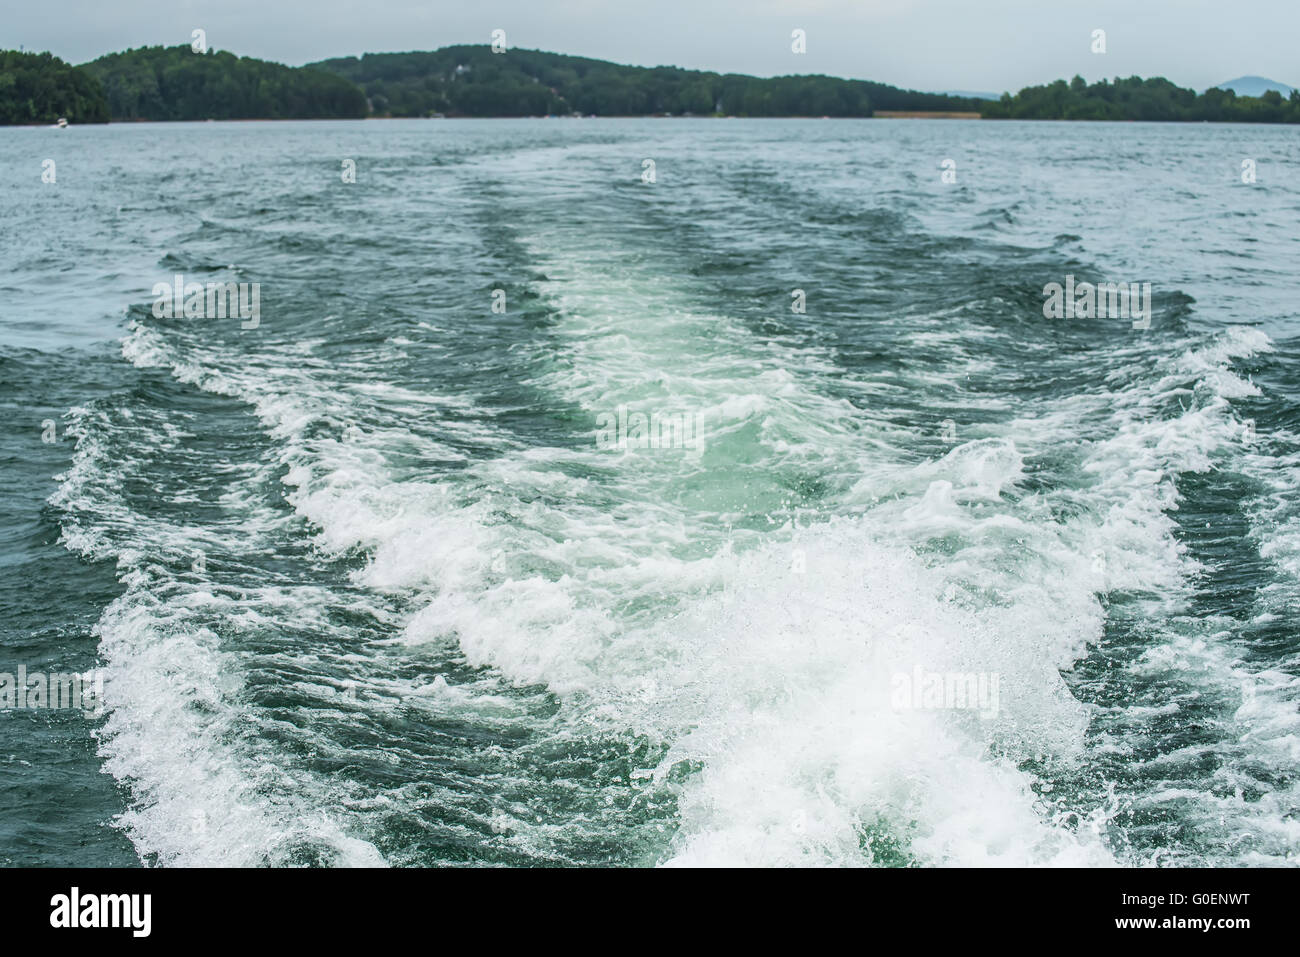 wake from a boat on lake Stock Photo